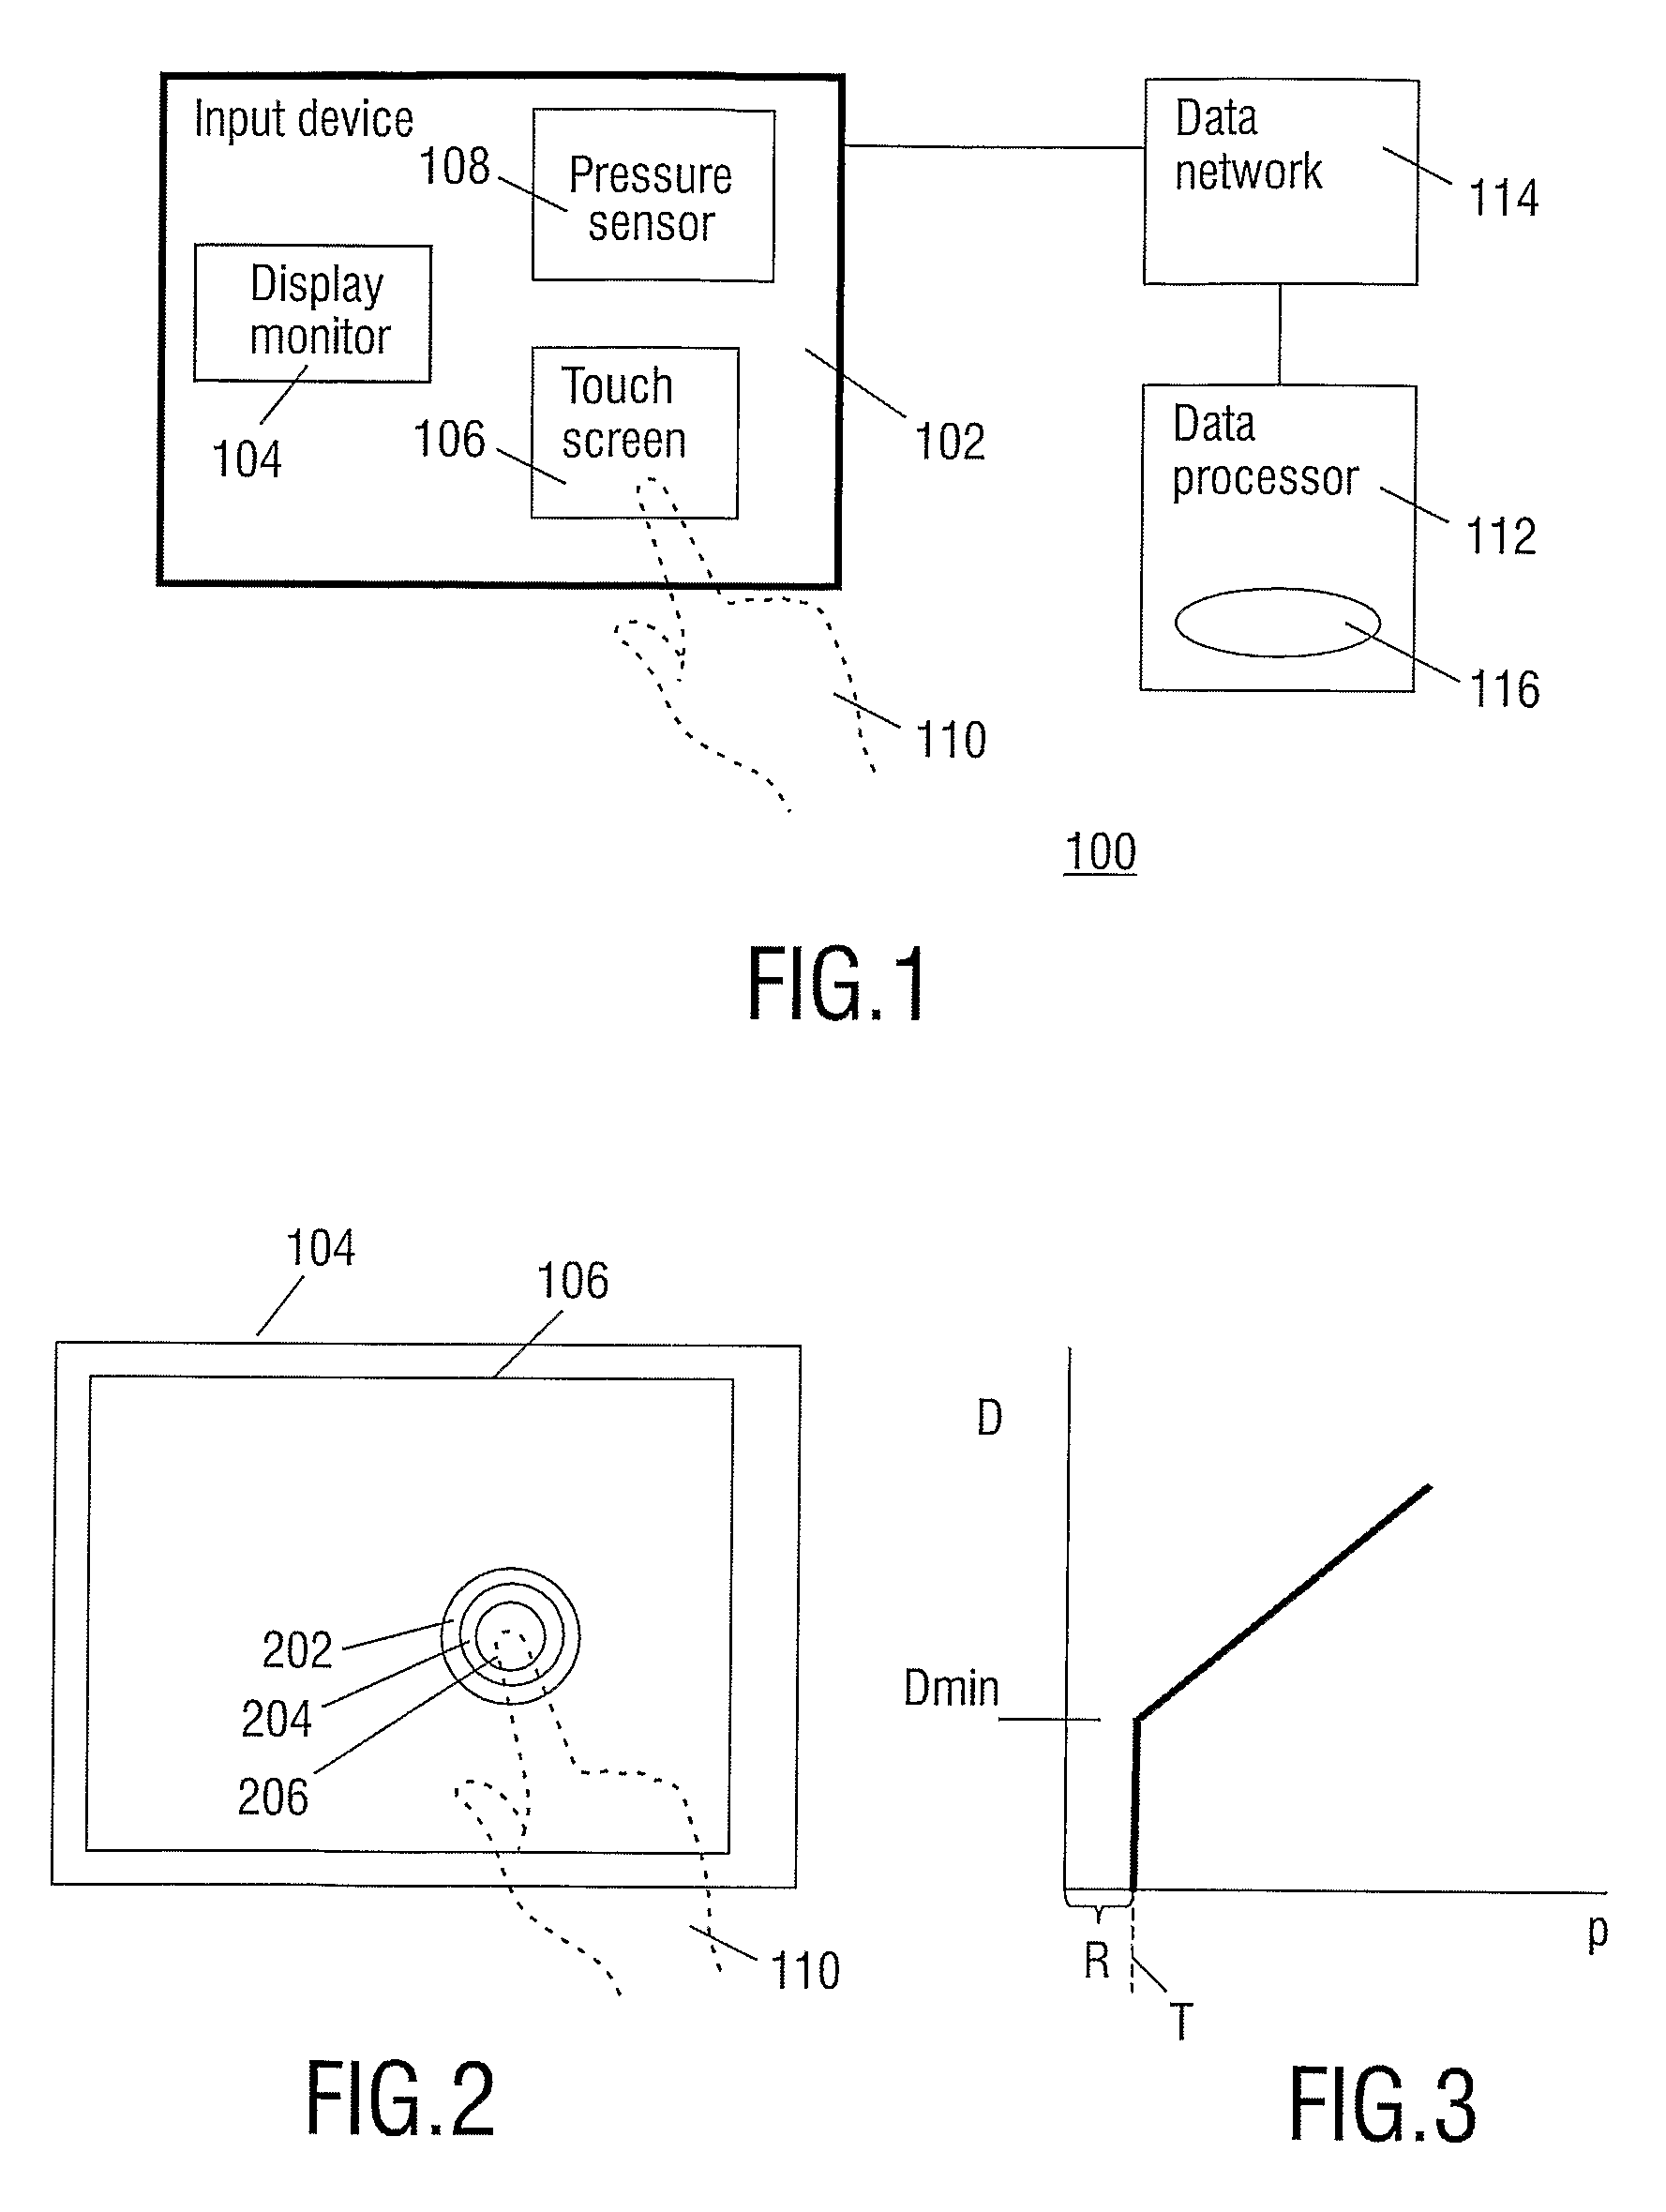 Touch screen with pressure-dependent visual feedback